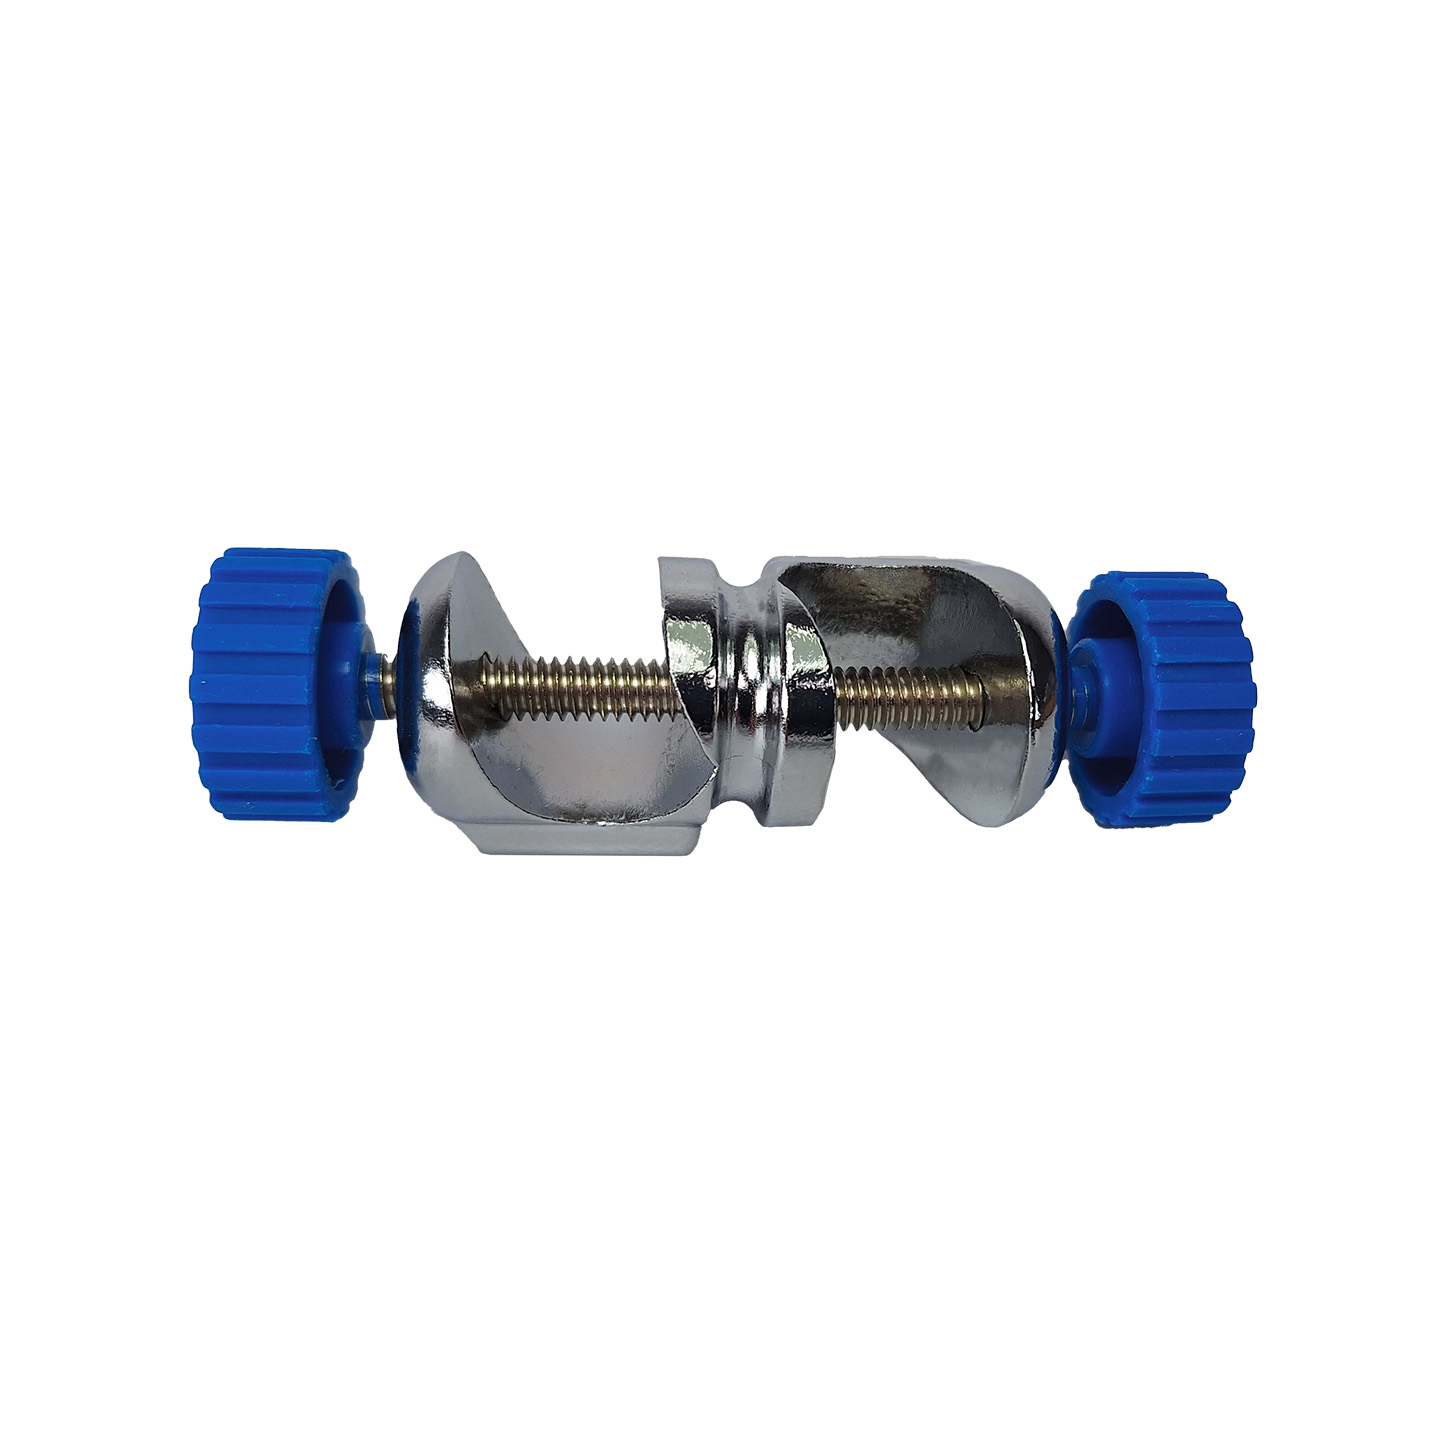 Bosshead, Nickel Plated Alloy, With Round Blue Screw Head, Fits Rod Up To 16mm